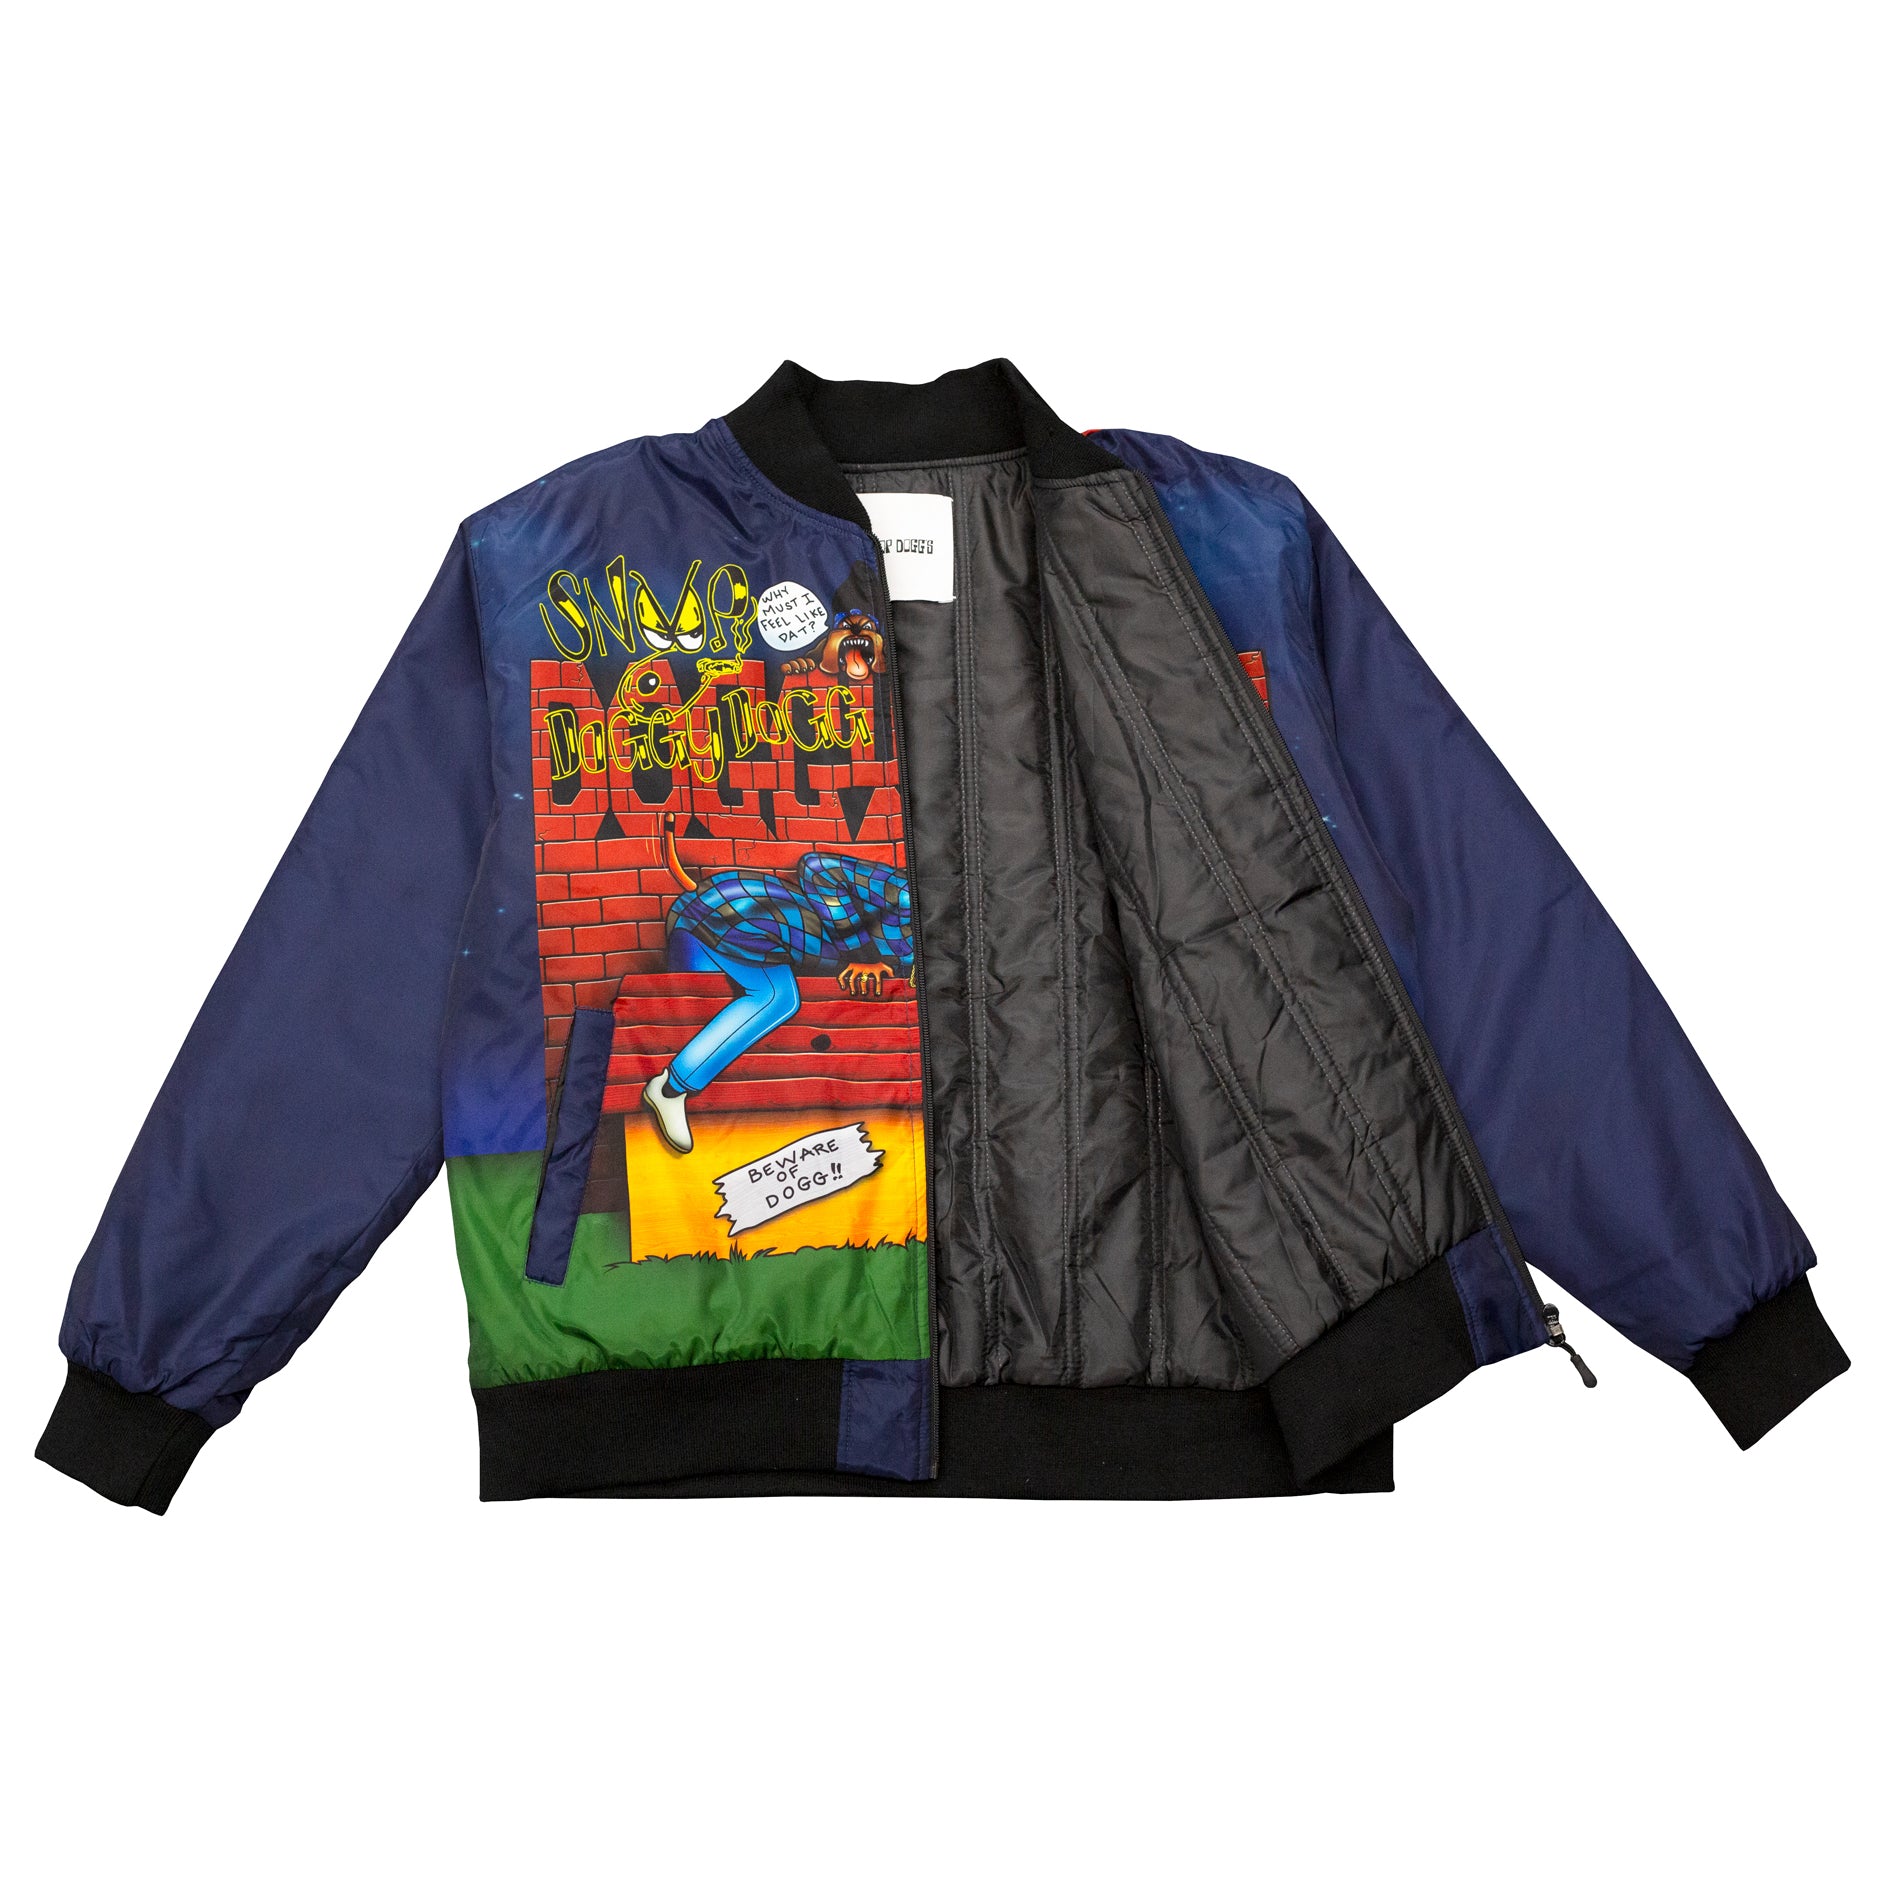 LIMITED TIME ONLY: DOGGYSTYLE BOMBER JACKET